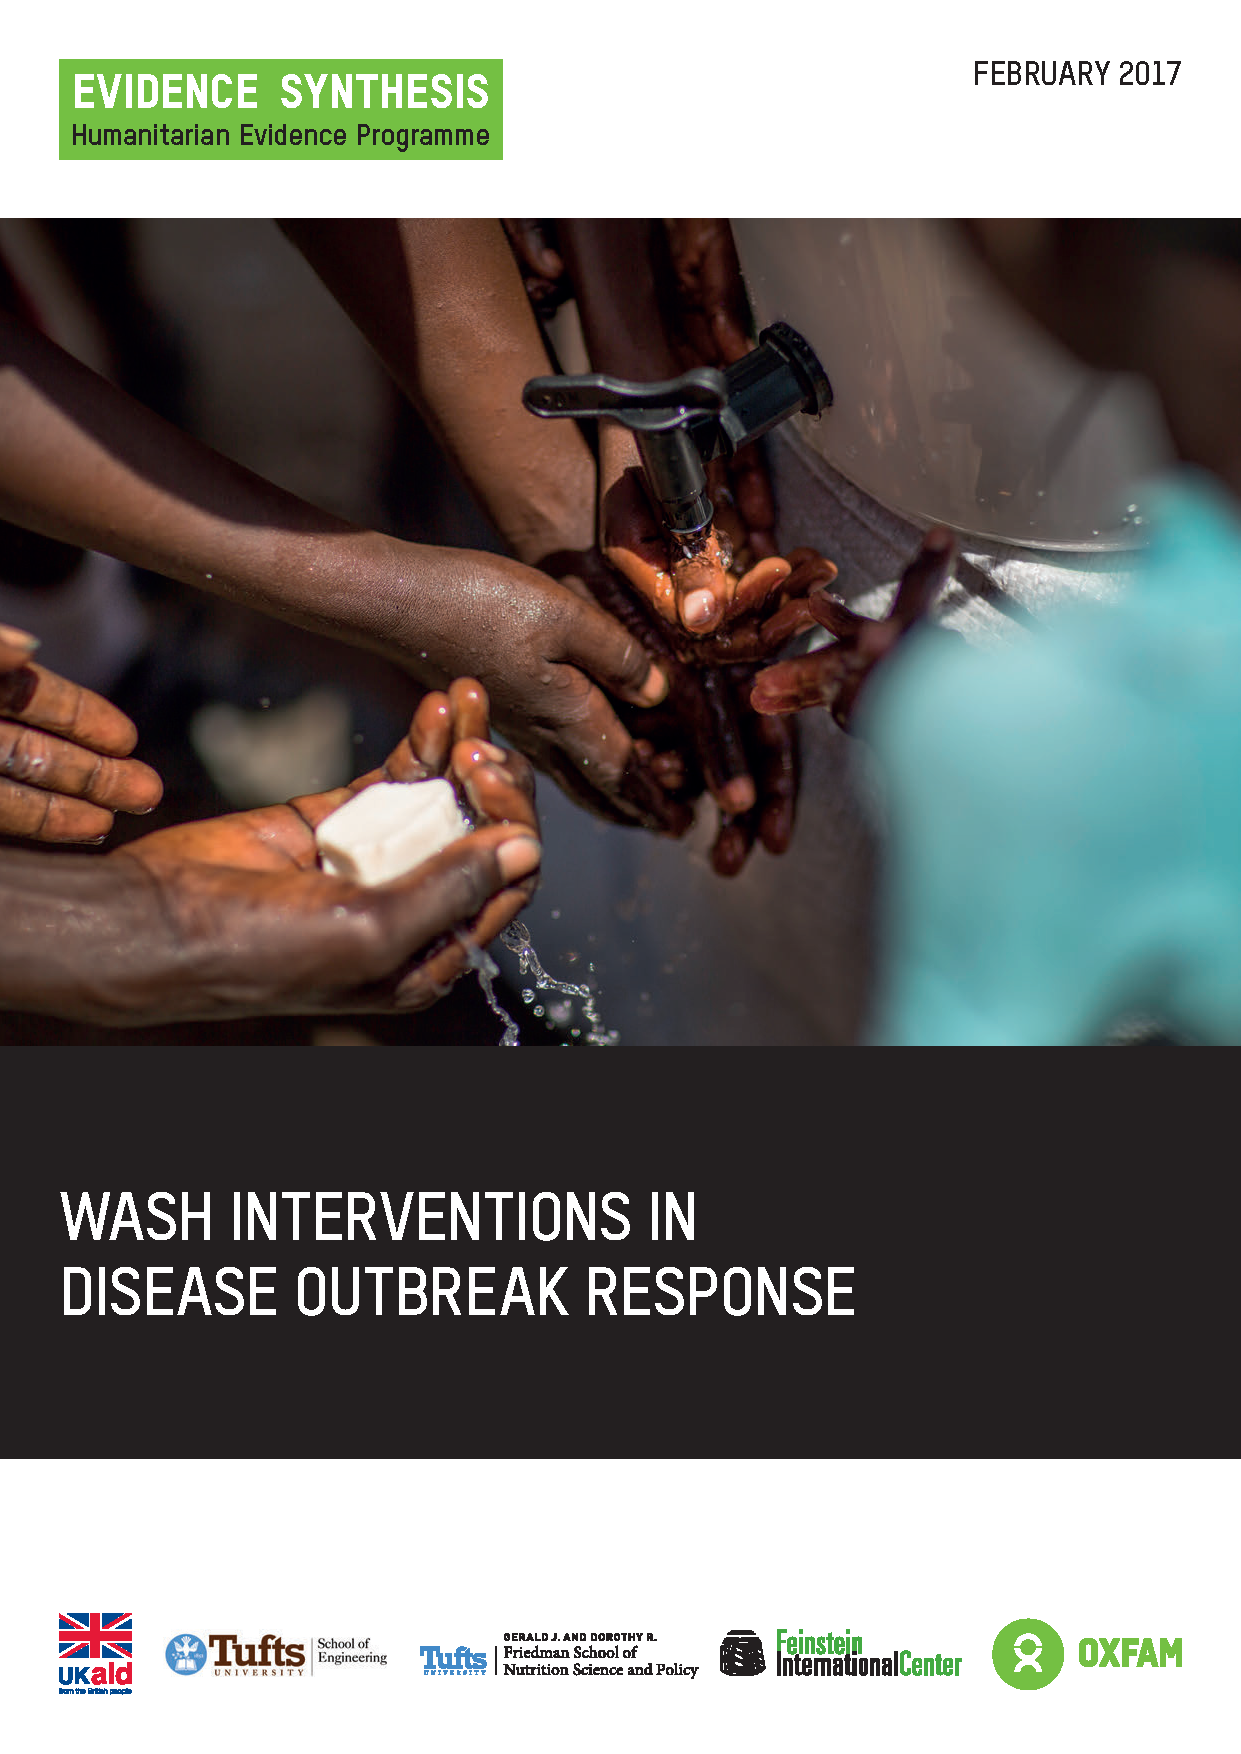 WASH interventions on disease outbreak cover